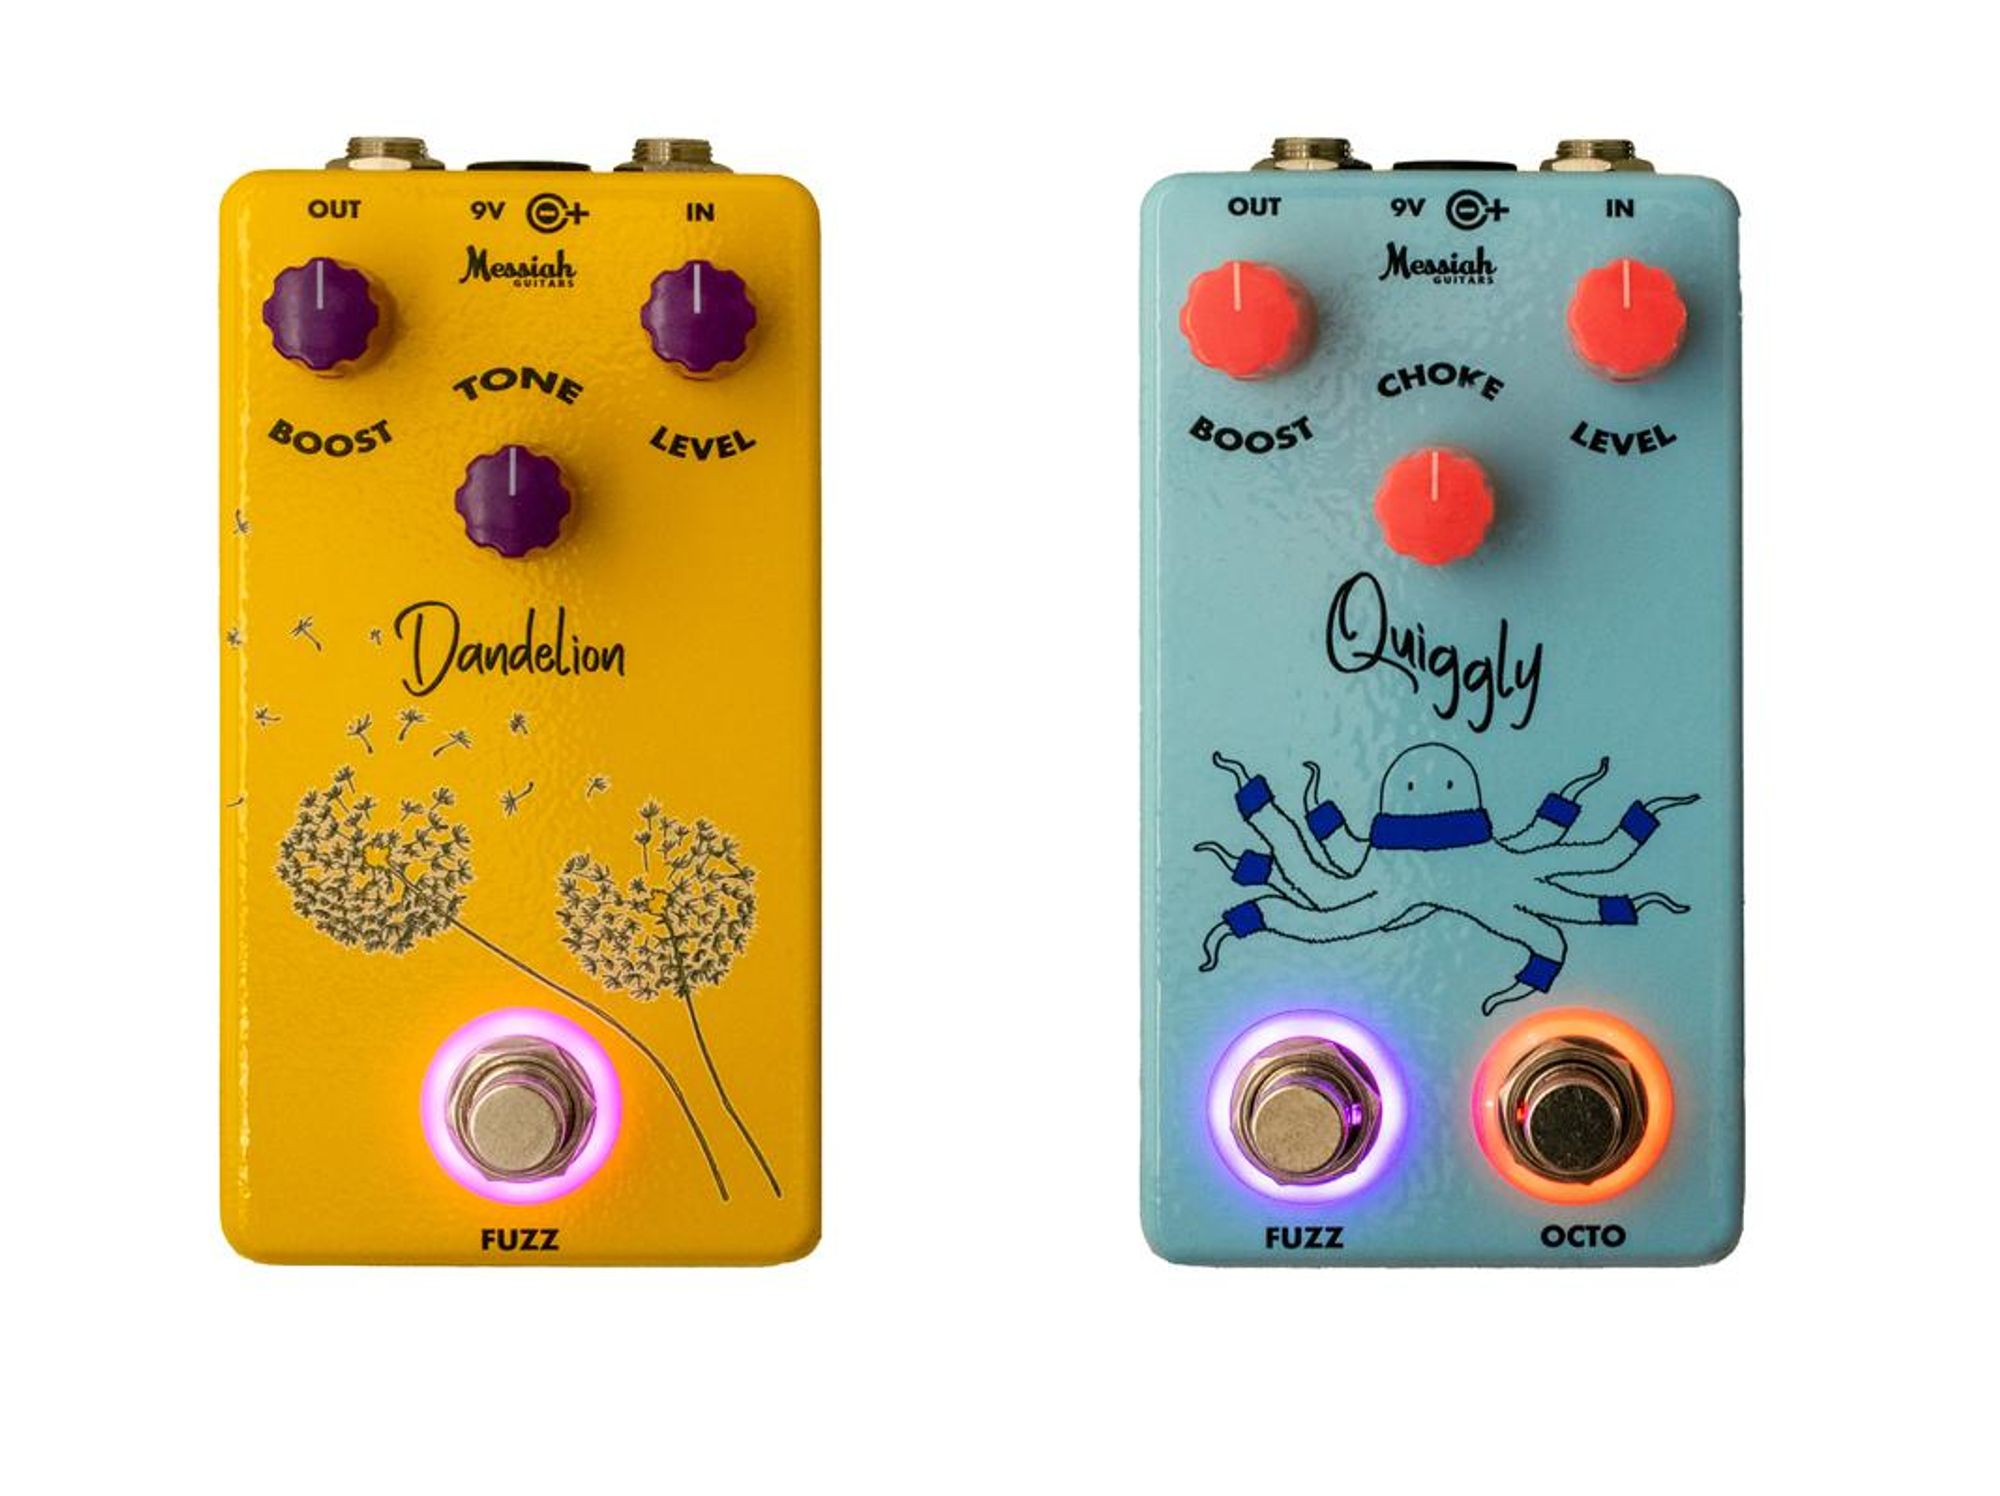 Messiah Guitars Introduces the Dandelion Fuzzdrive and Quiggly Octofuzz